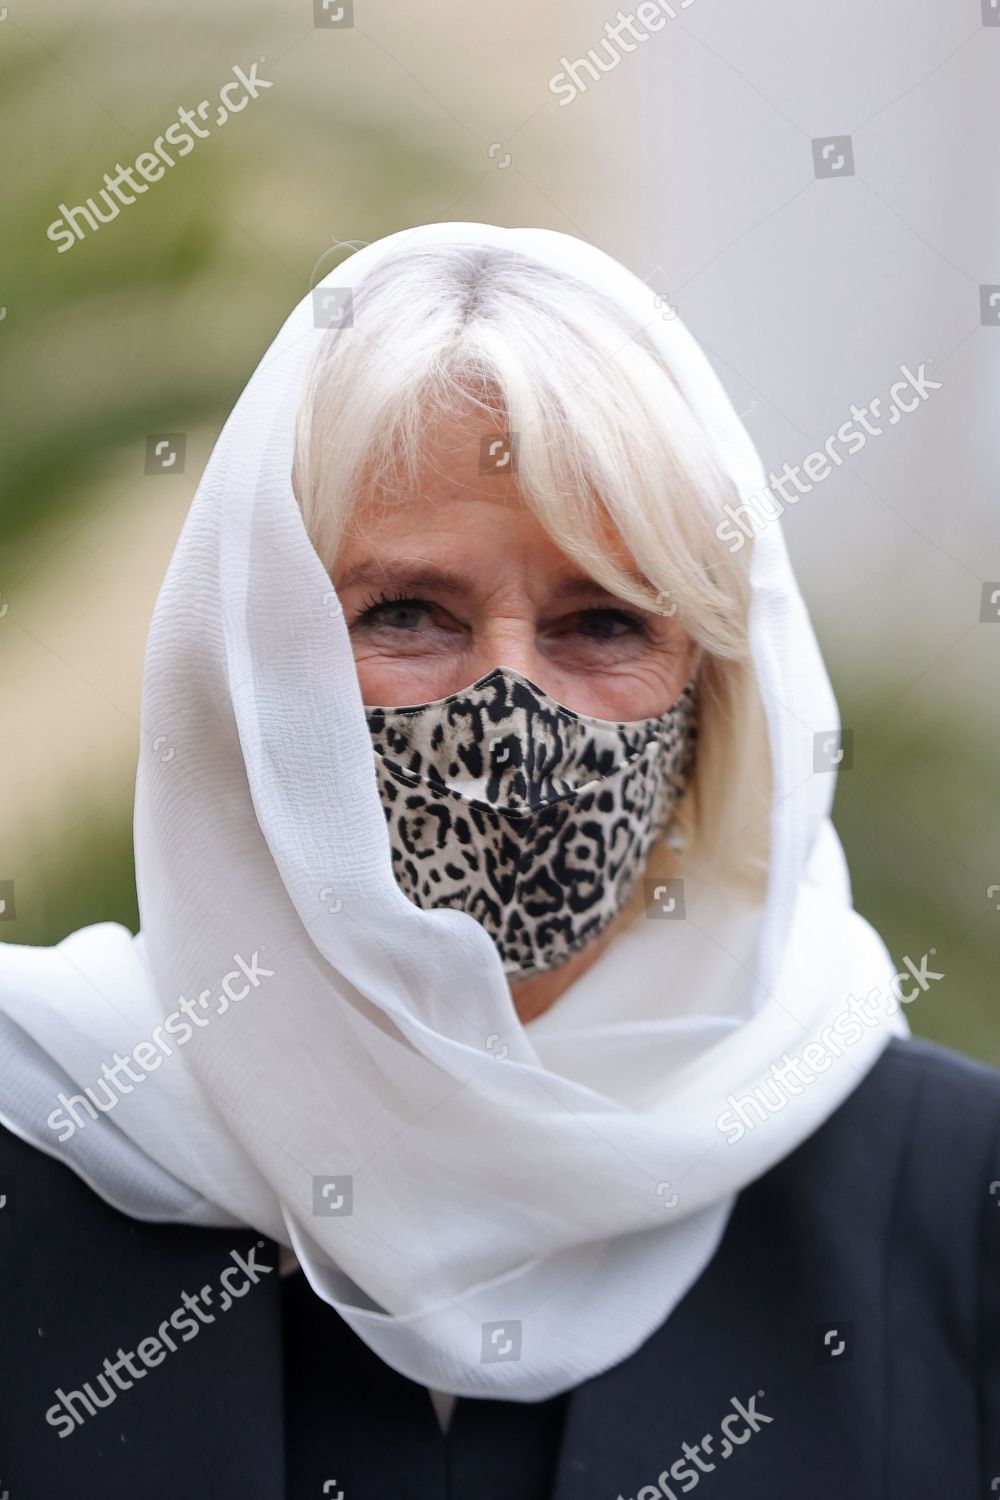 CASA REAL BRITÁNICA - Página 52 Camilla-duchess-of-cornwall-visit-to-wightman-road-mosque-london-uk-shutterstock-editorial-11847770f